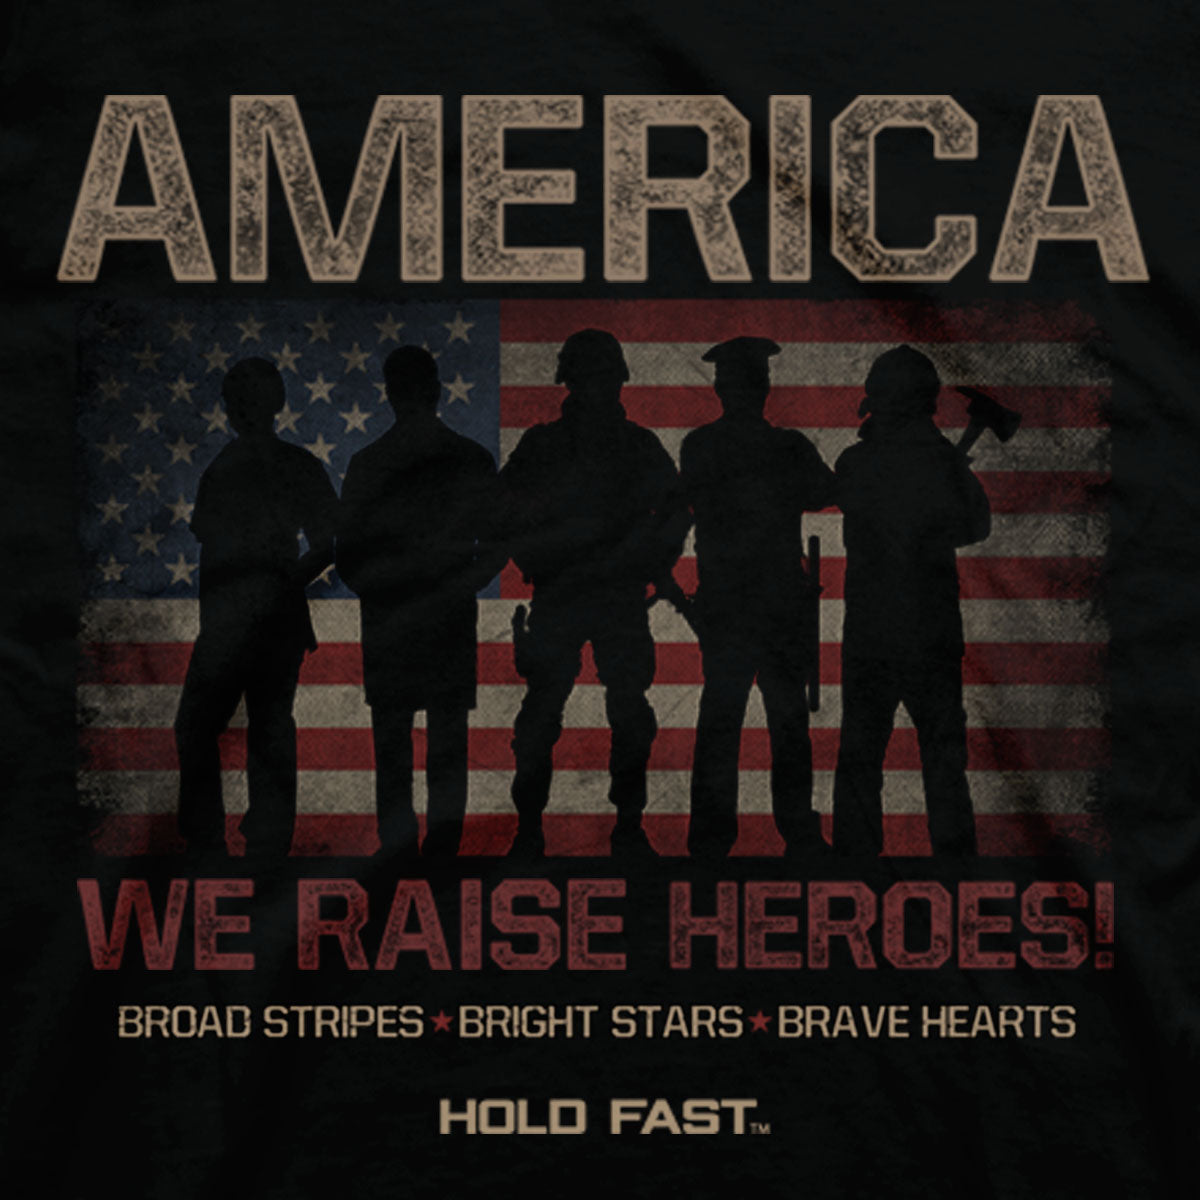 HOLD FAST Mens T-Shirt American Heroes